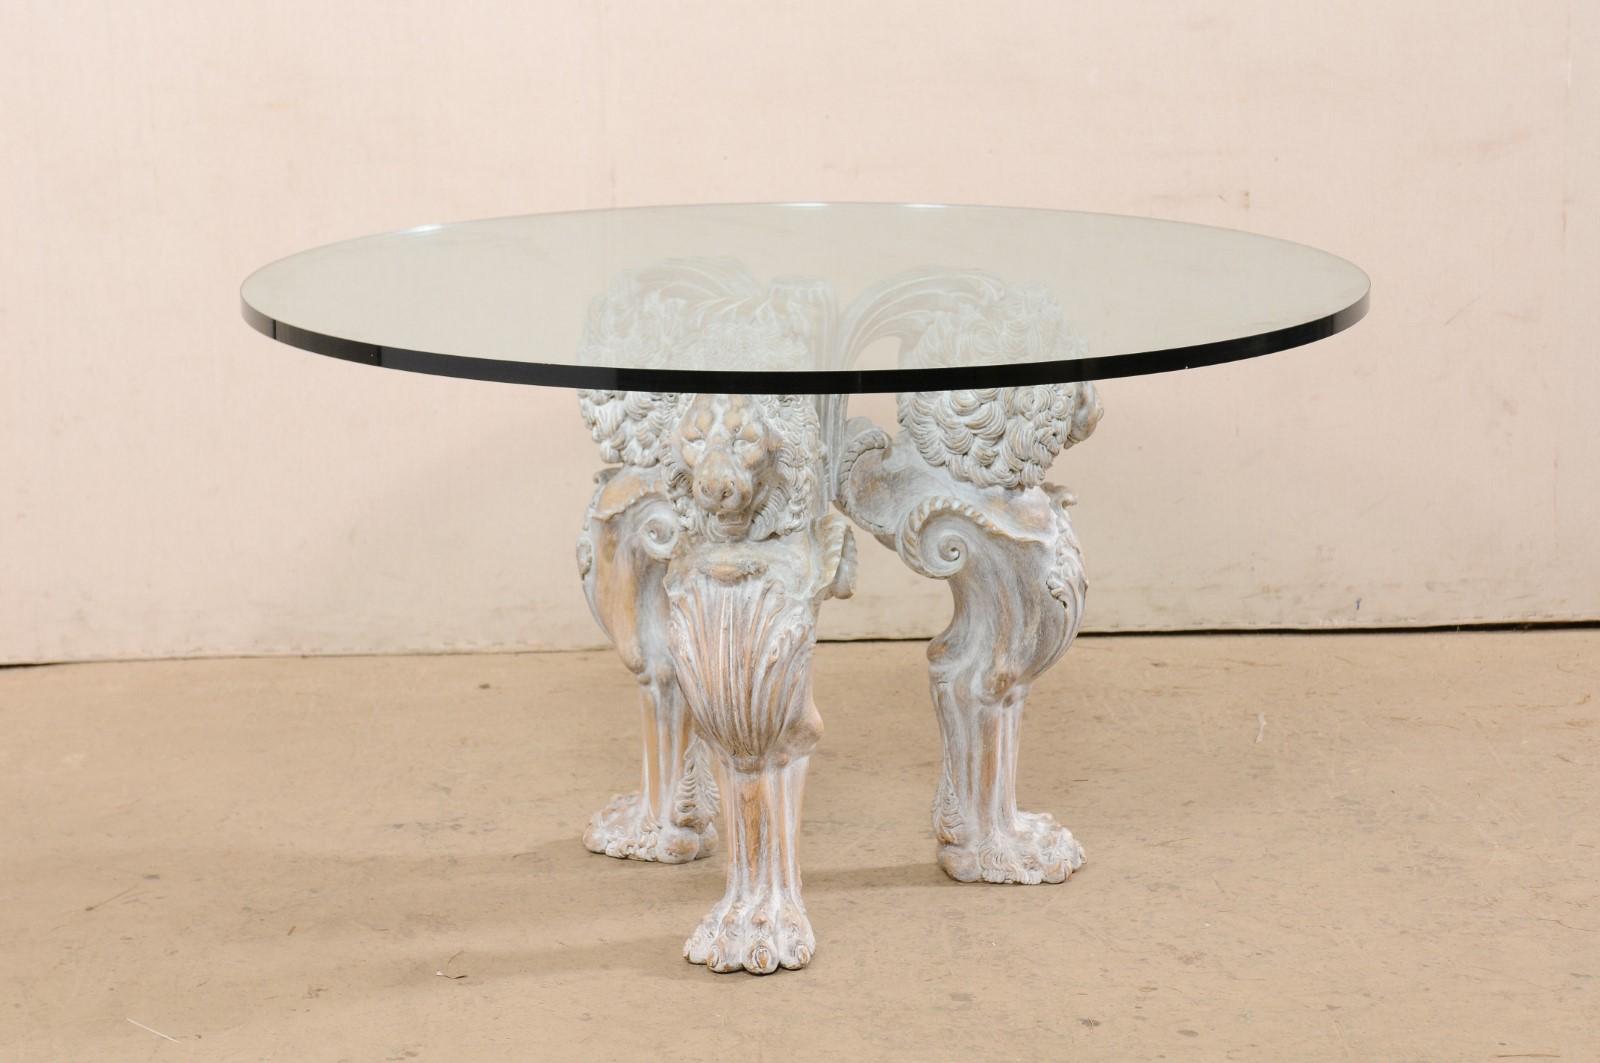 An Italian glass top dining table with lion motif carved base. This vintage table from Italy is topped with a 52